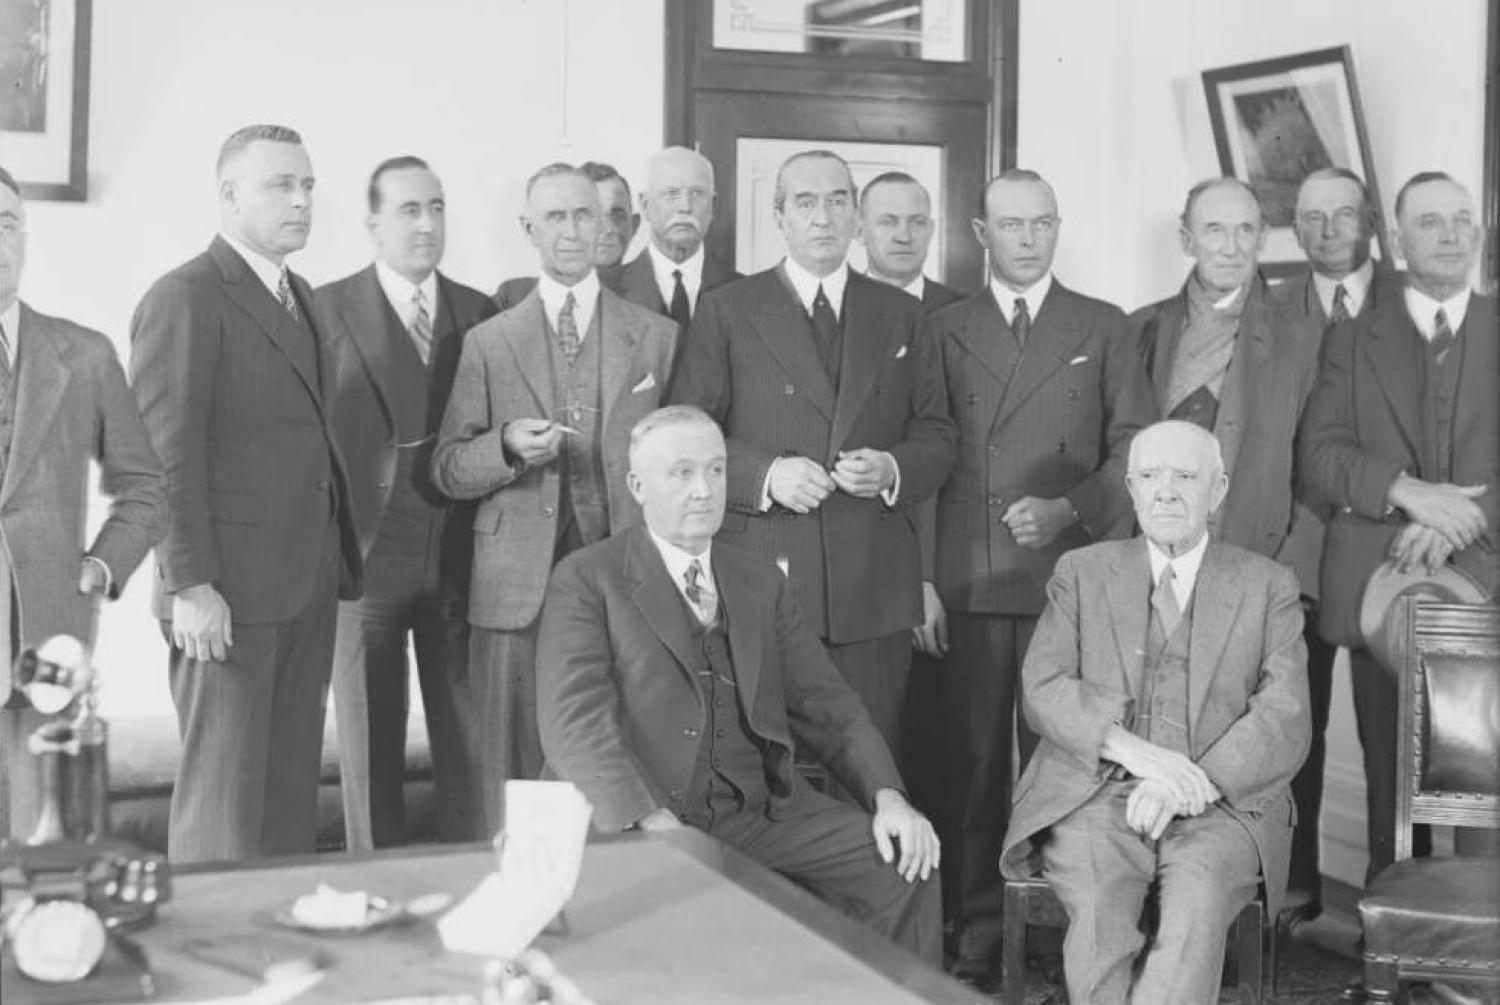 Former Prime Minister Stanley Bruce (centre, standing) and senators, New South Wales, 1 May 1934 (Courtesy NLA/Fairfax Media)